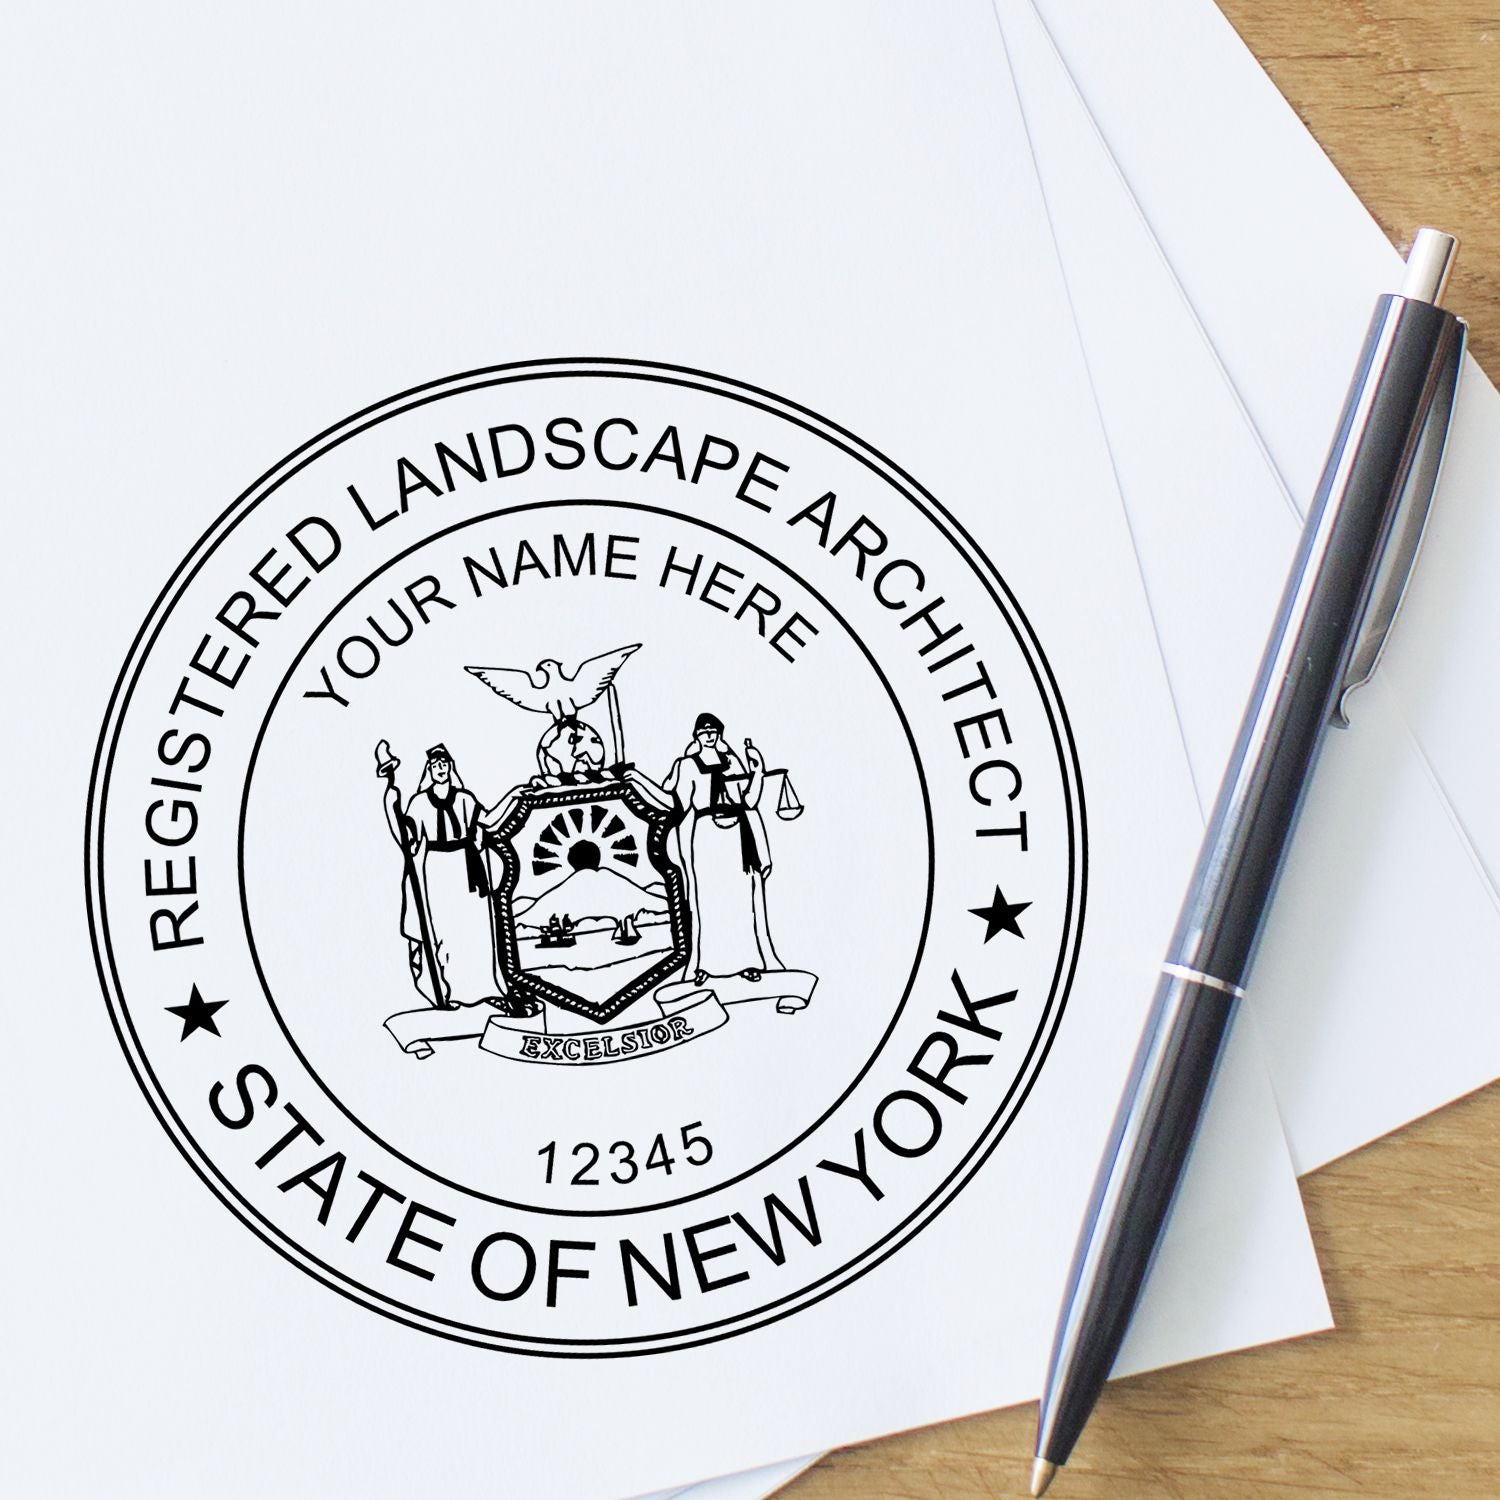 This paper is stamped with a sample imprint of the New York Landscape Architectural Seal Stamp, signifying its quality and reliability.